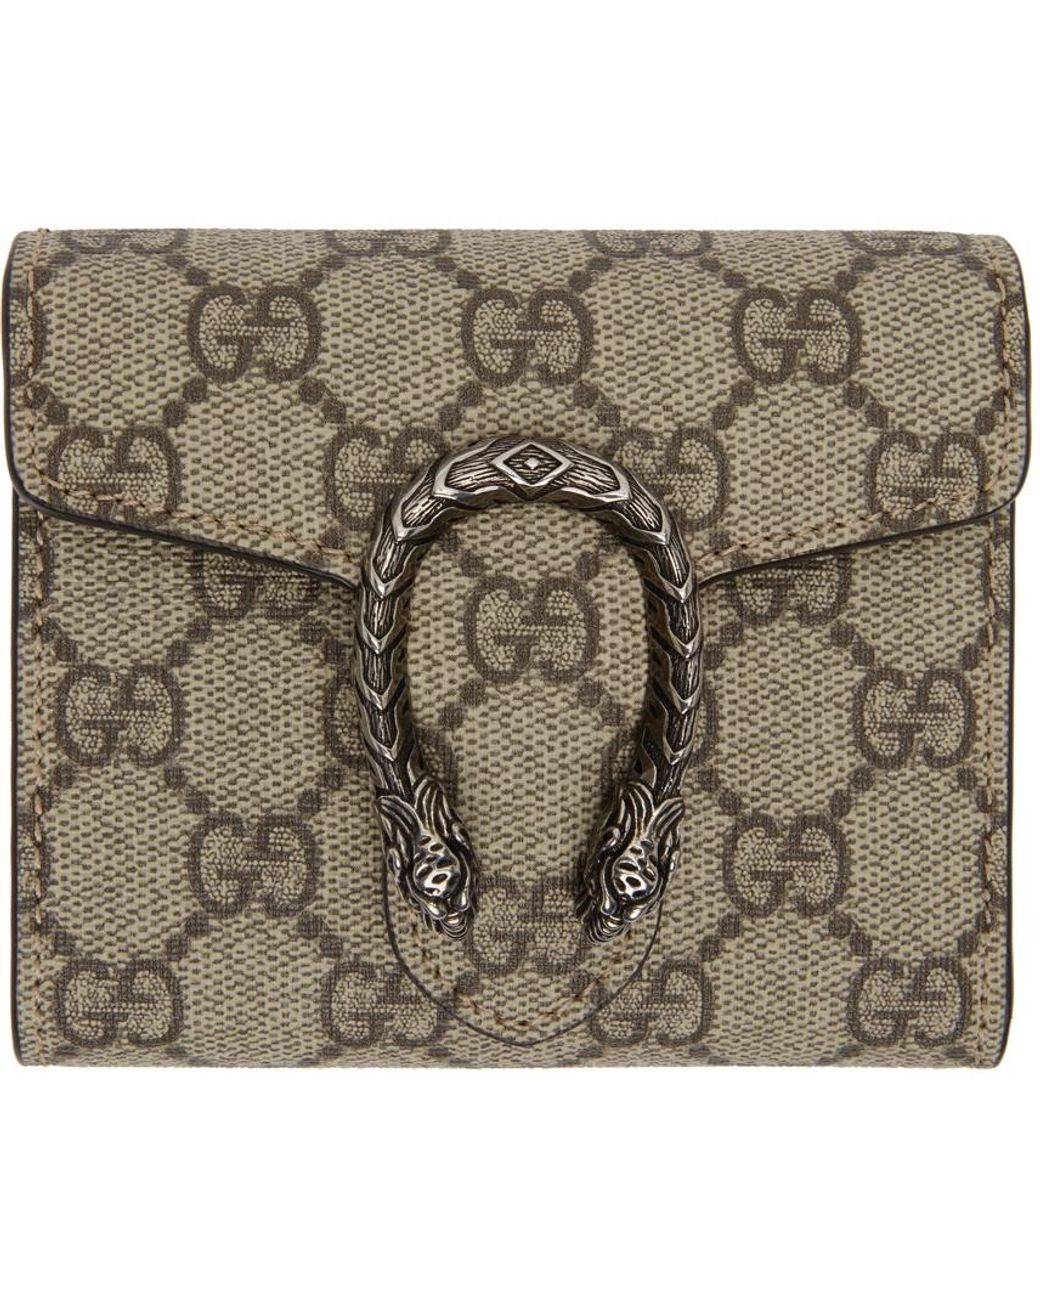 Gucci Dionysus Card Case Wallet in Natural | Lyst